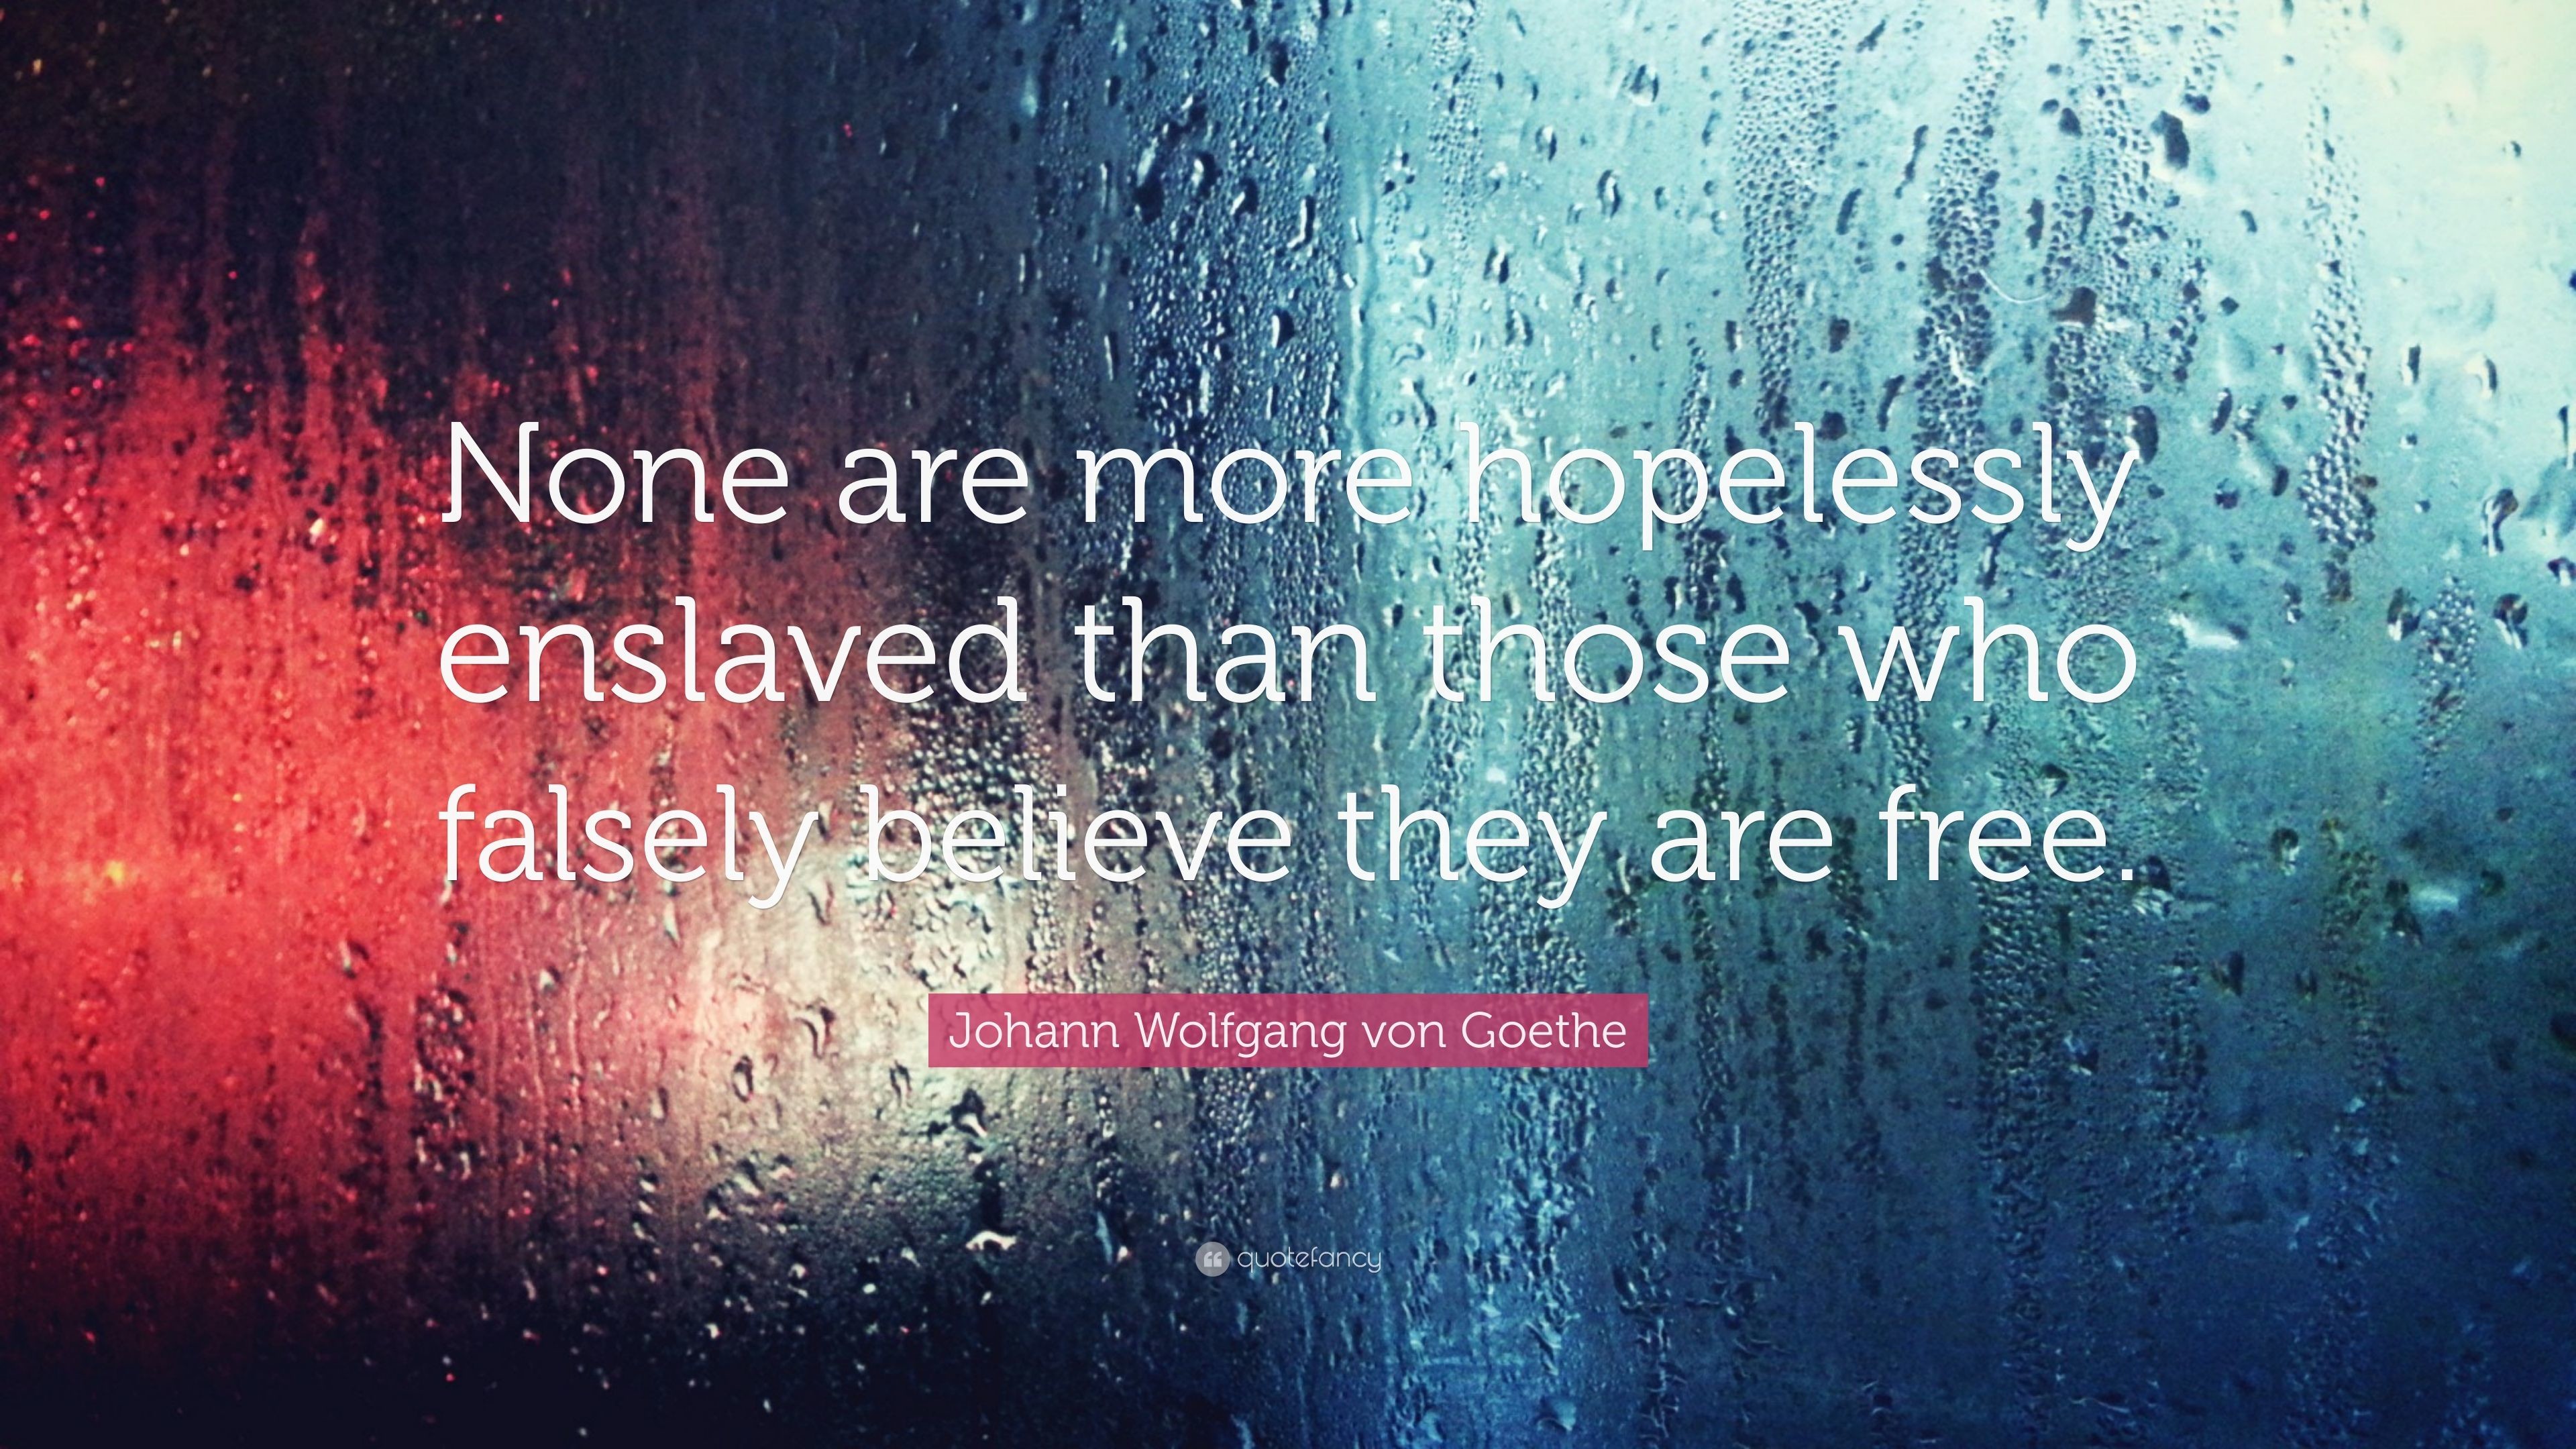 3840x2160 Johann Wolfgang von Goethe Quote: “None are more hopelessly enslaved than  those who falsely